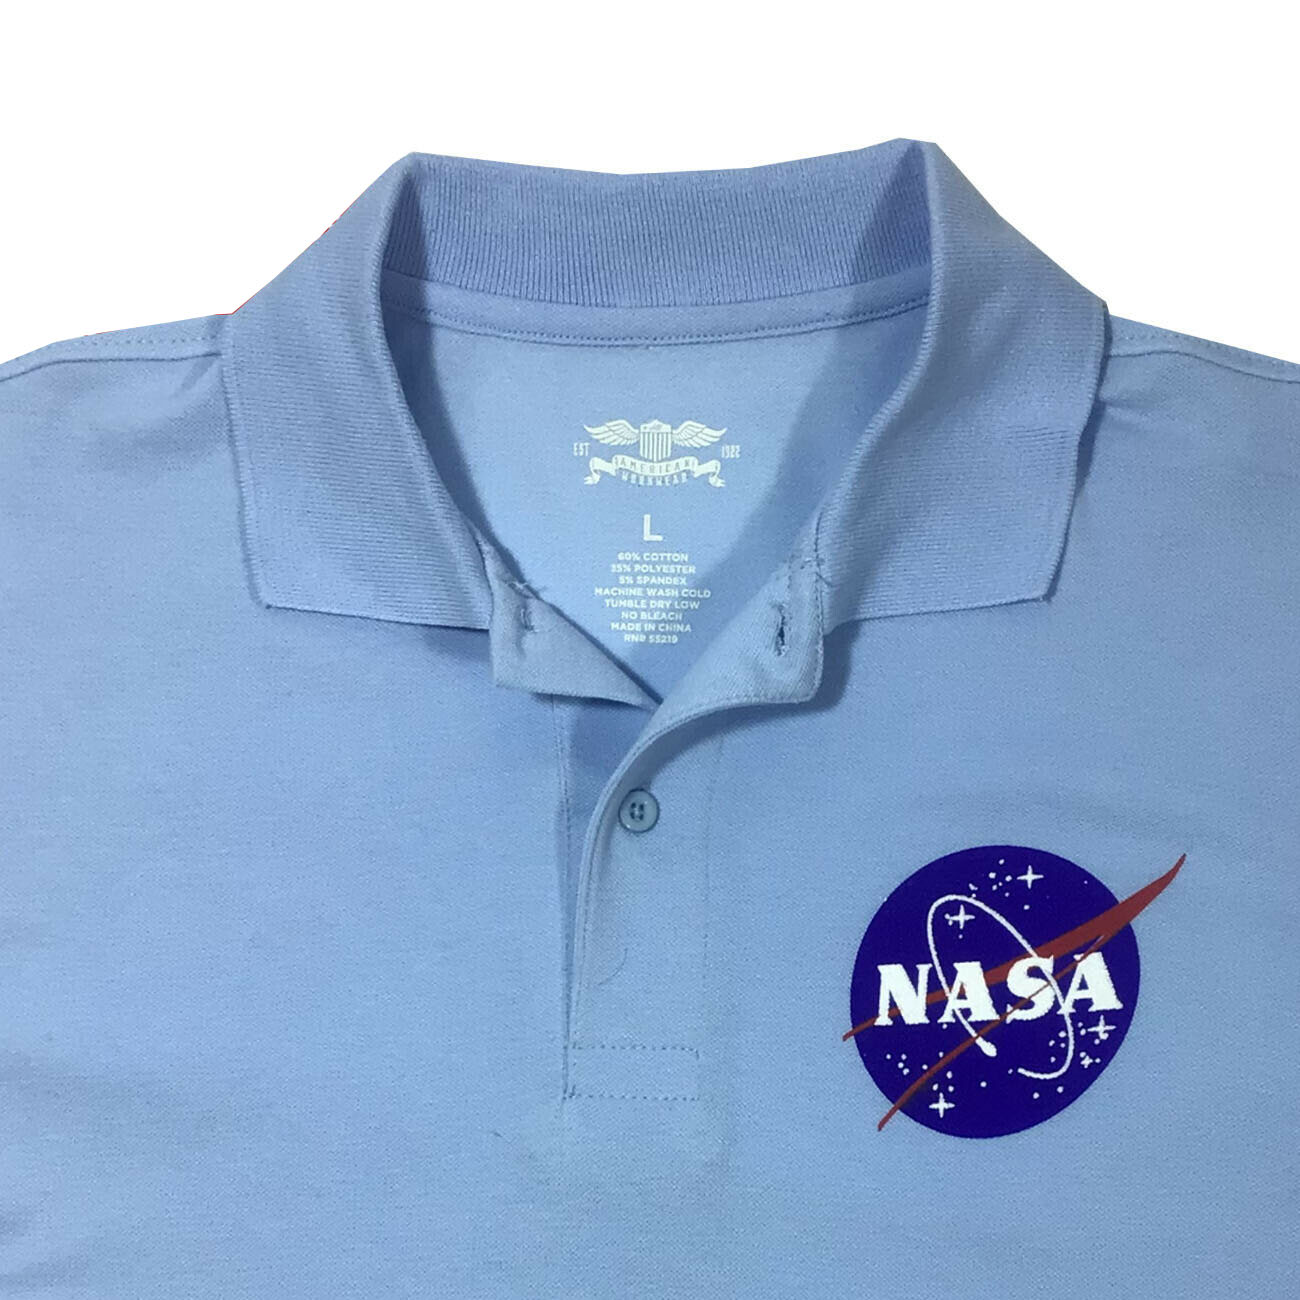 Men's Polo Shirt NASA 5% Spandex-All American Work Wear -Button Polo-Relaxed Fit SKY BLUE / WHITE / BLACK